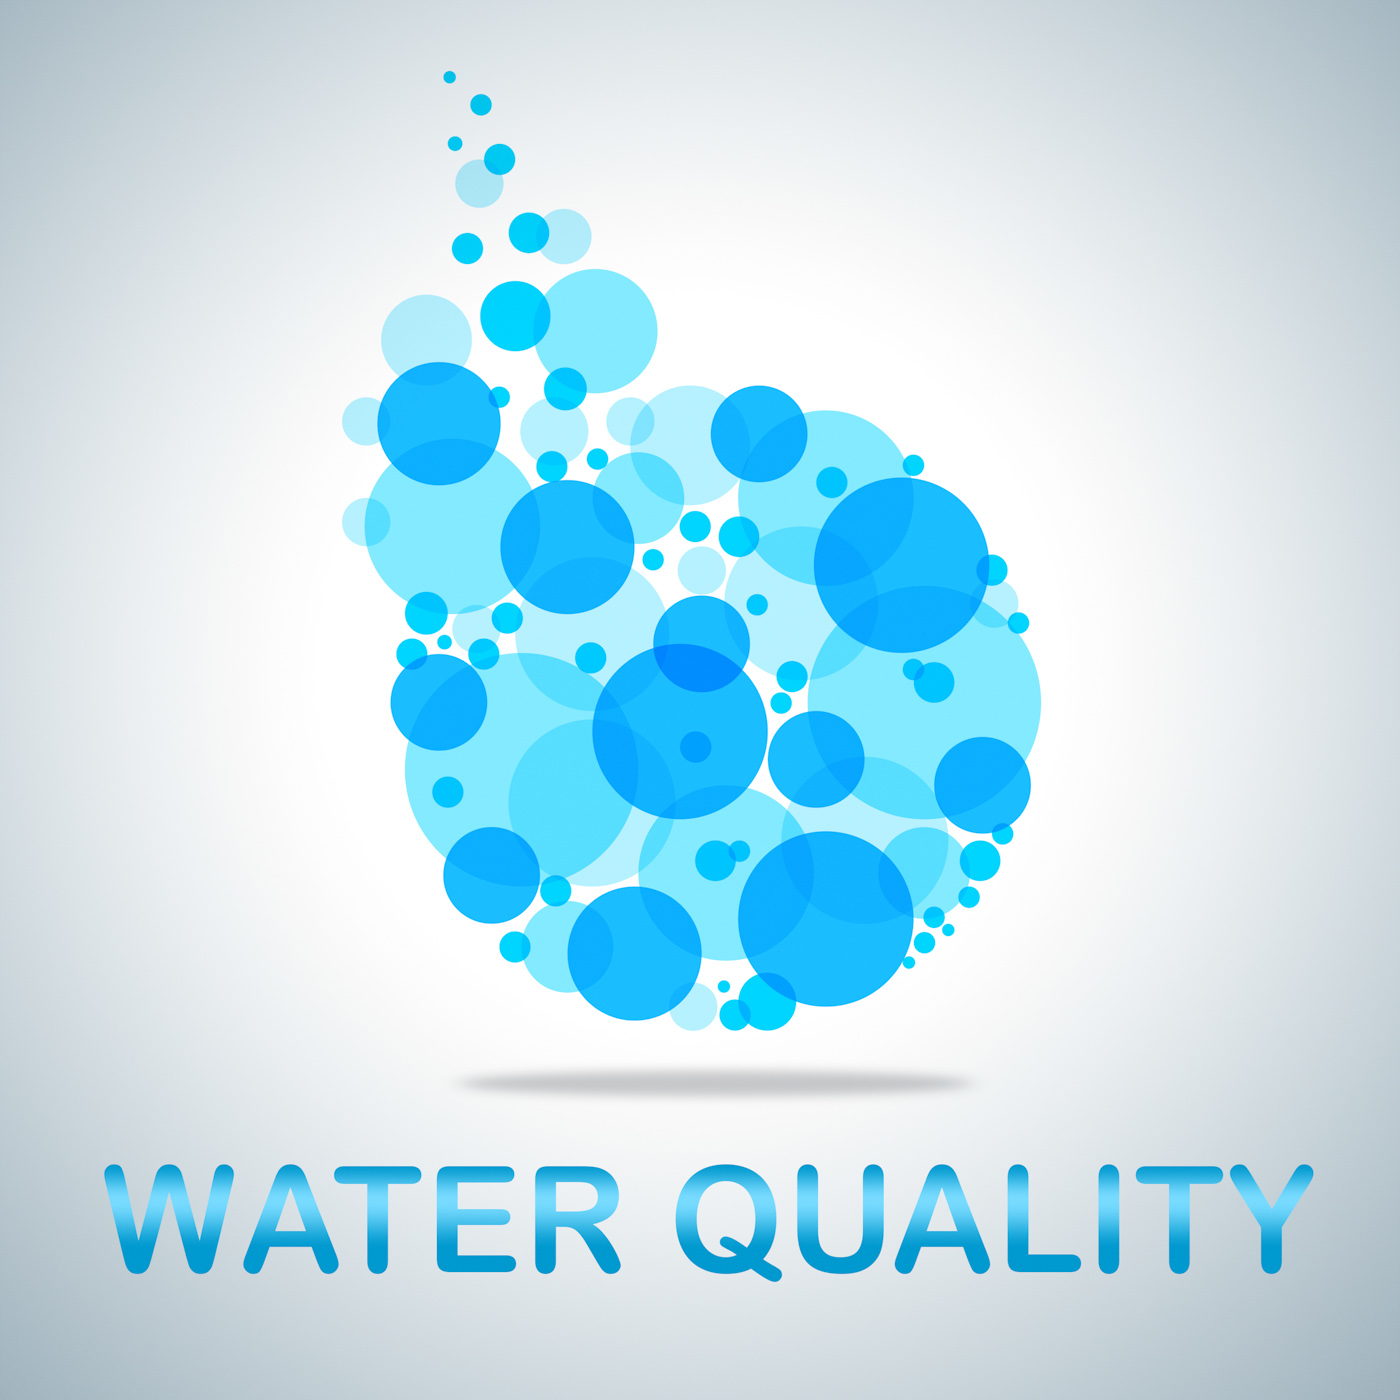 Water quality represents approve perfection and checked photo